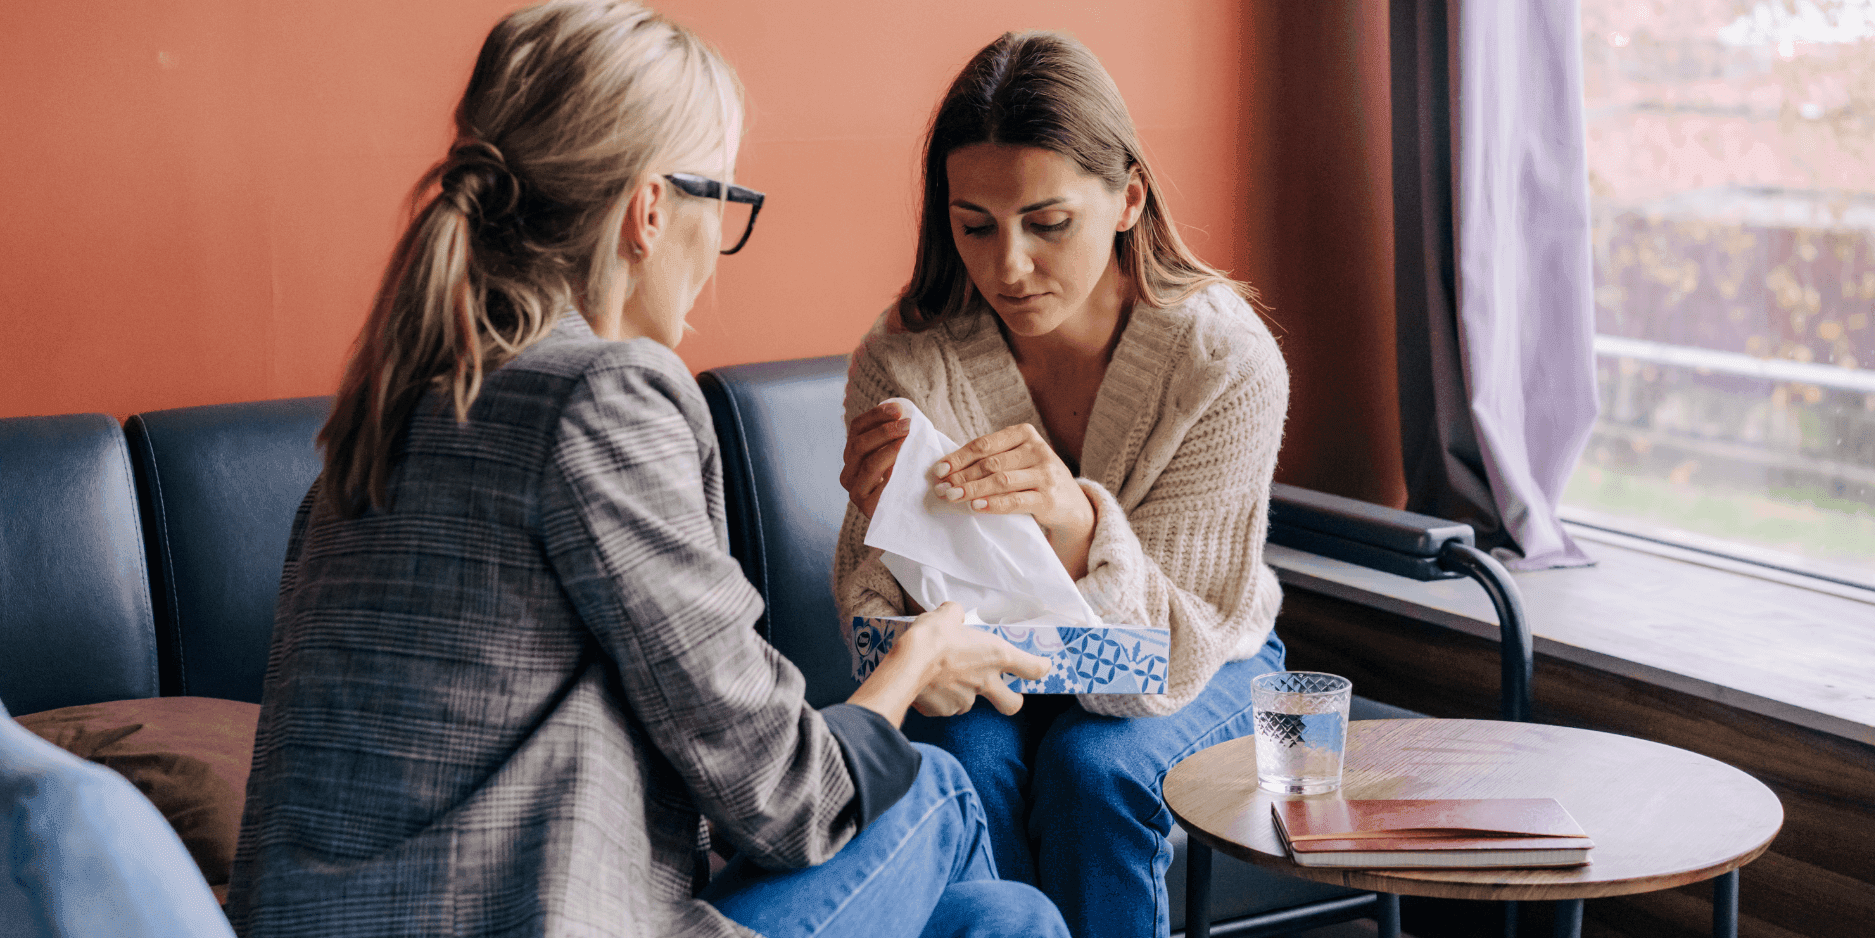 A therapist hands a box of tissues to a young woman who looks upset.